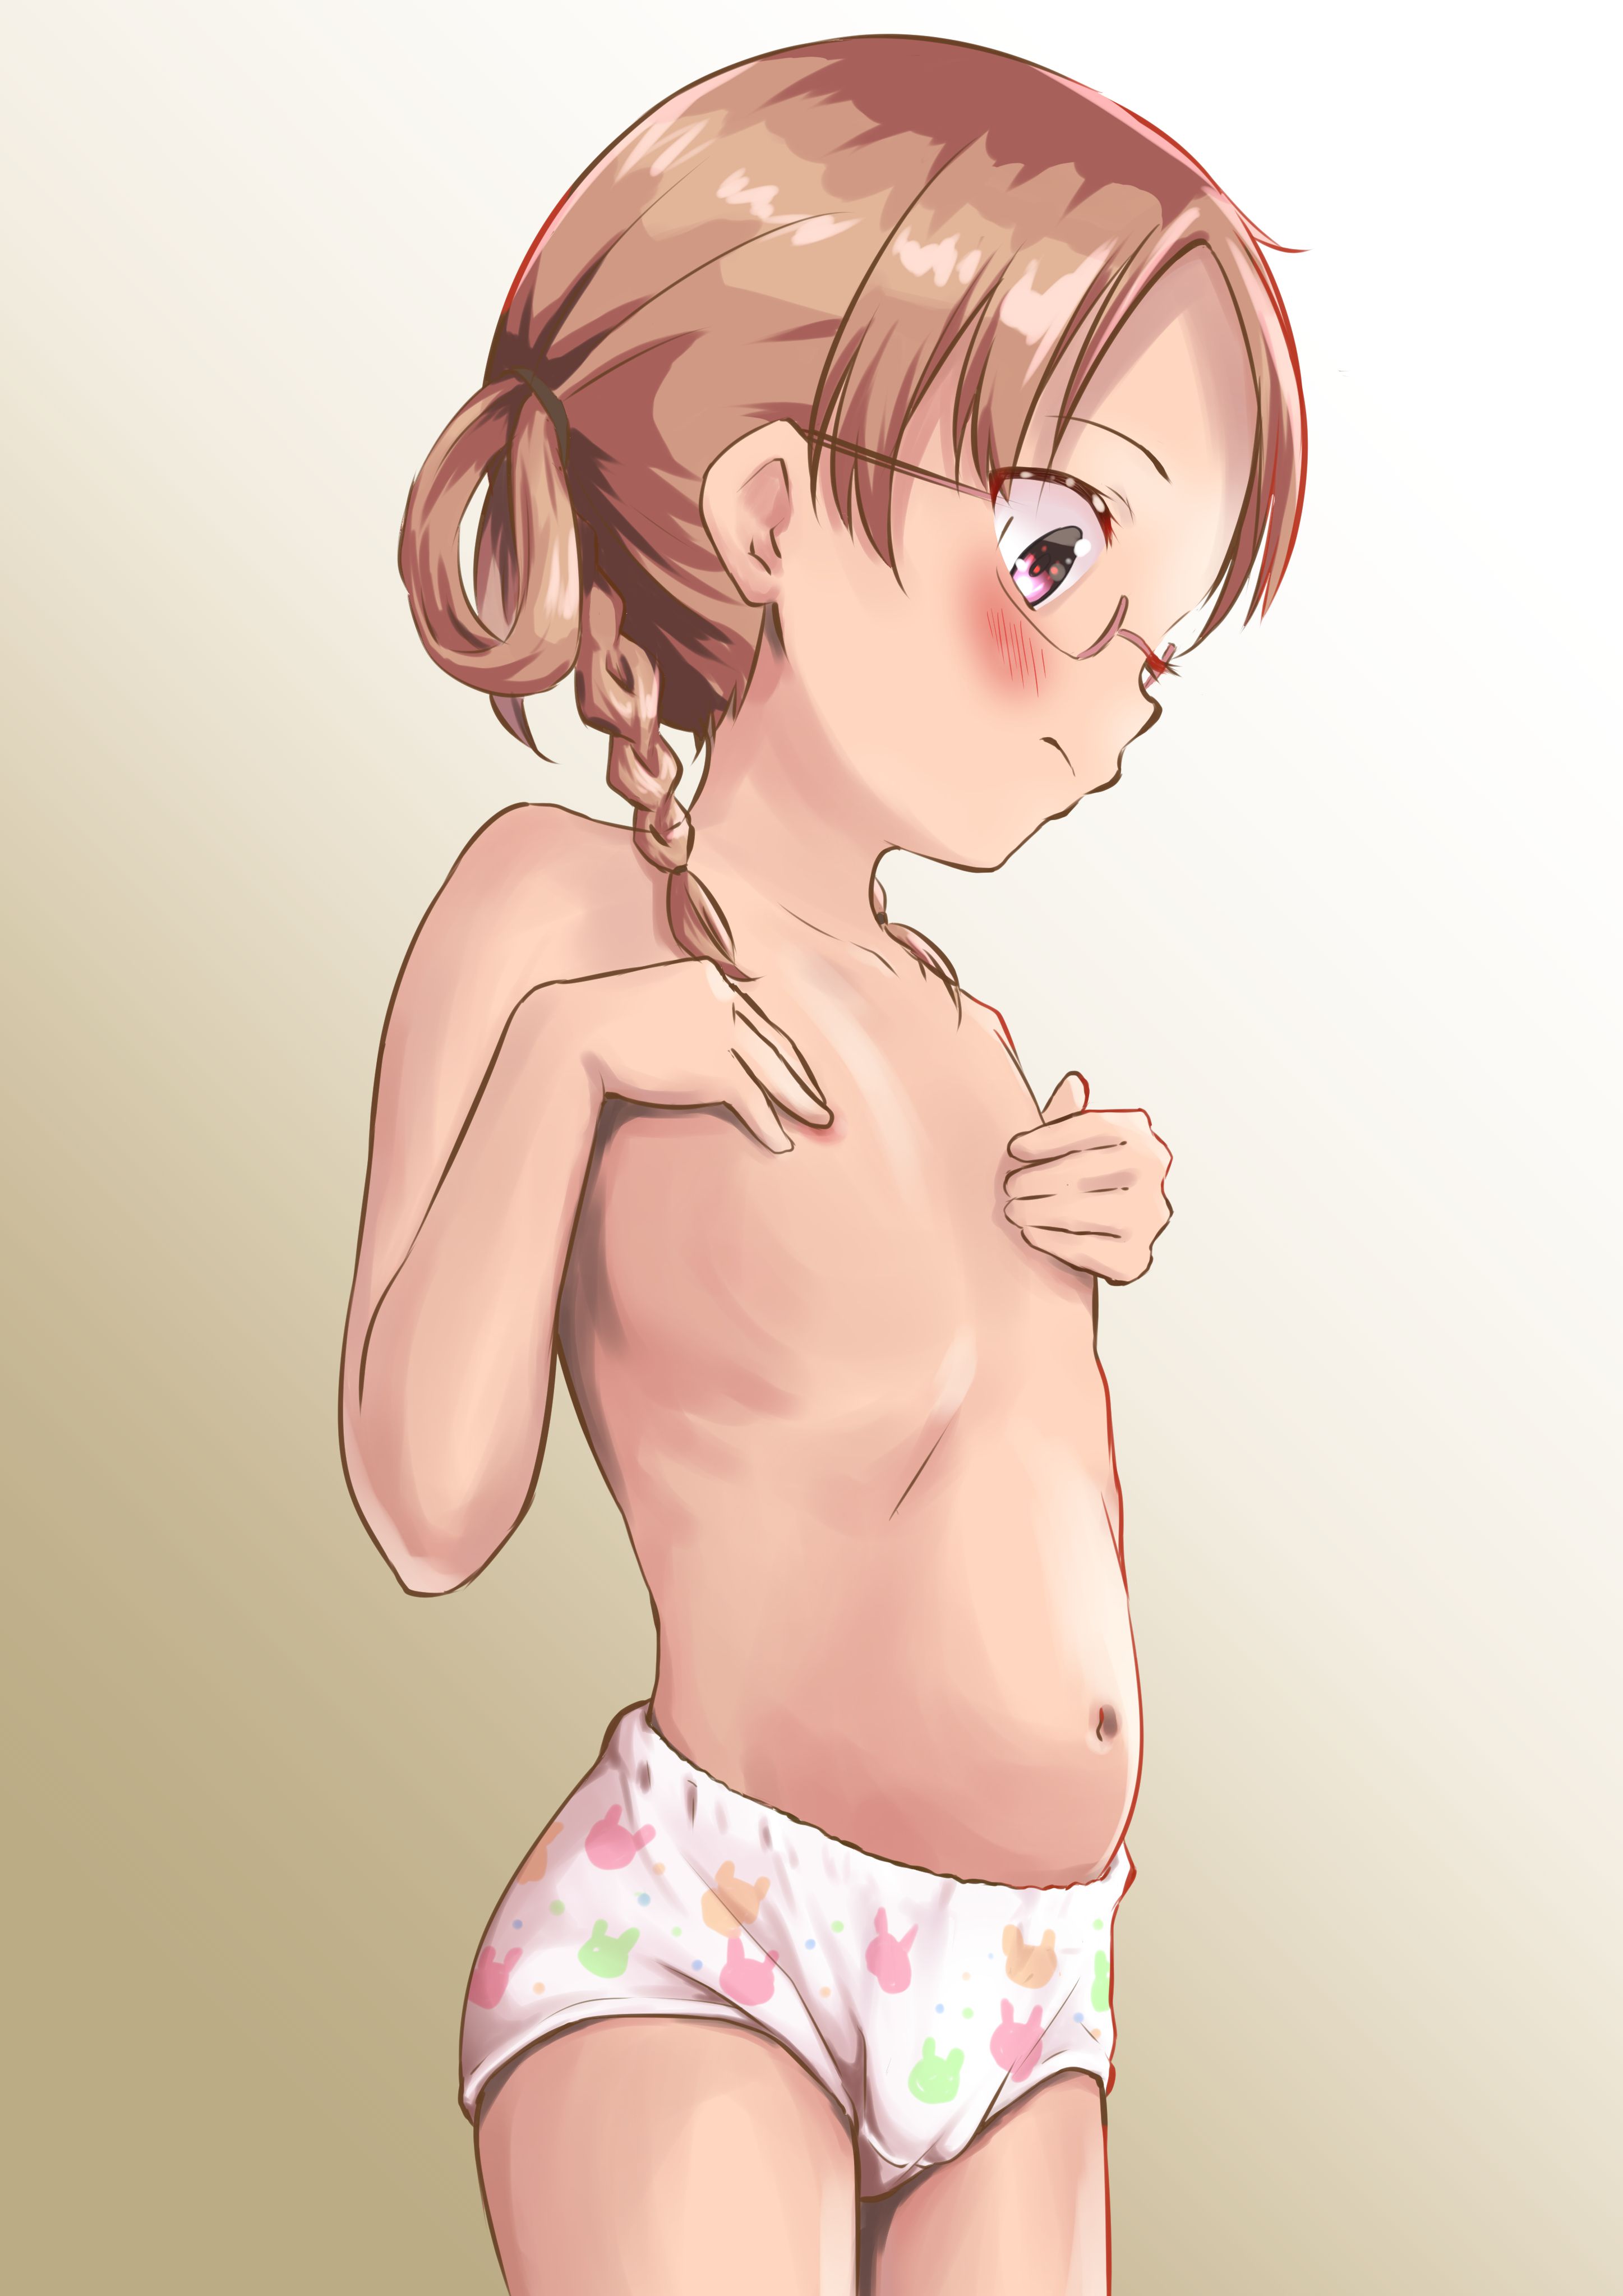 【Excited about Lori pants】 Lori pants secondary erotic image excited by looking at the cute figure of the treasure of the pants of the secondary loli girl 66